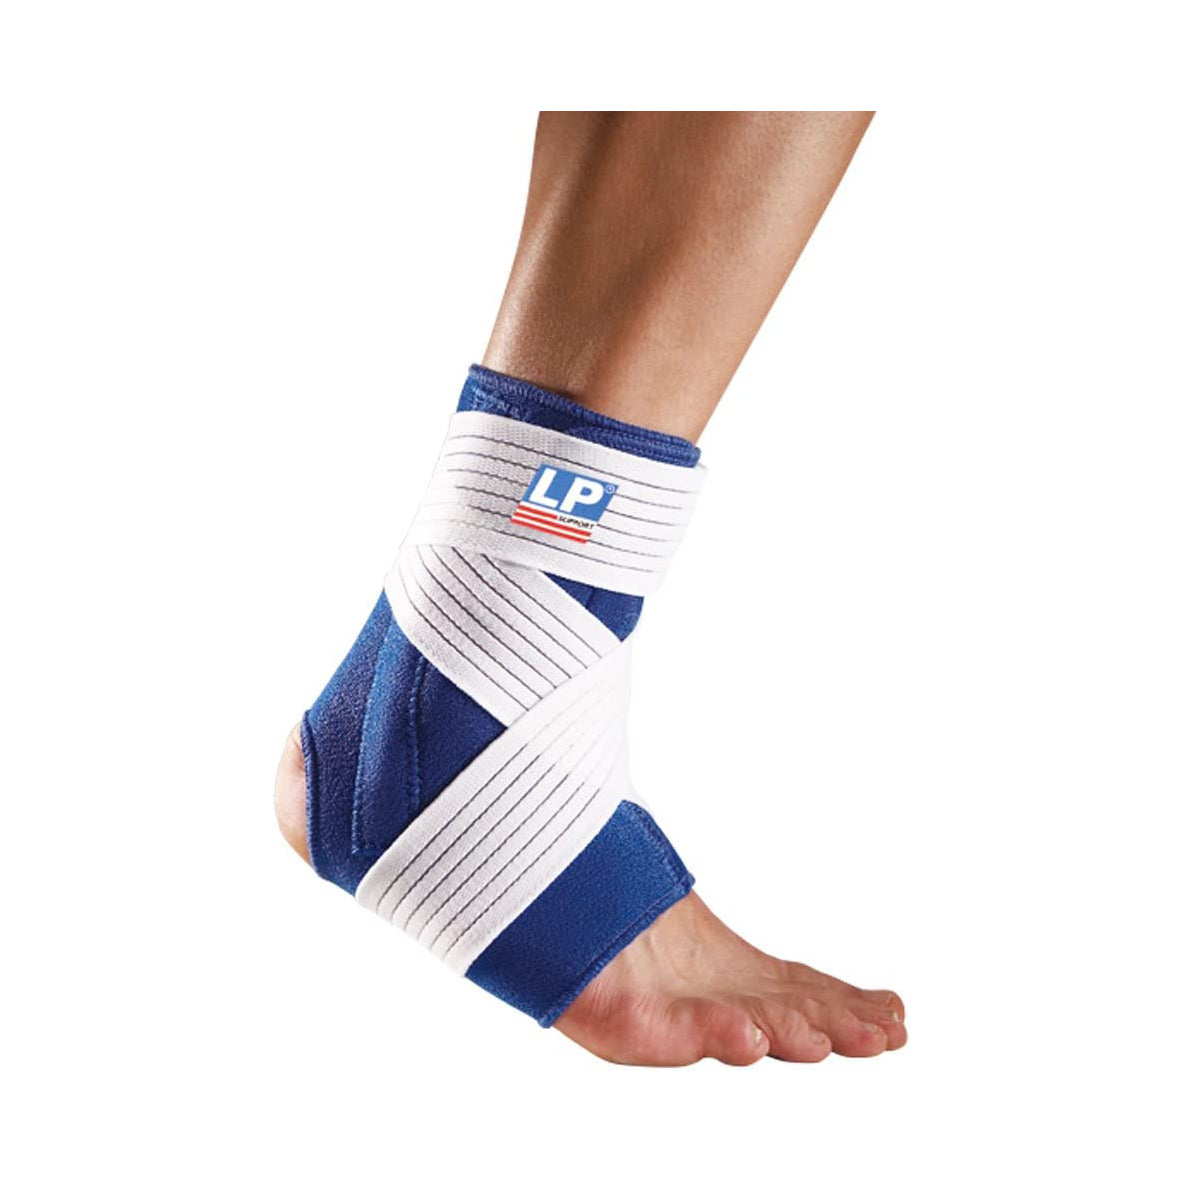 LP ANKLE SUPPORT (WITH STAY AND STRAP) 775-BL ANKLE SUPPORT